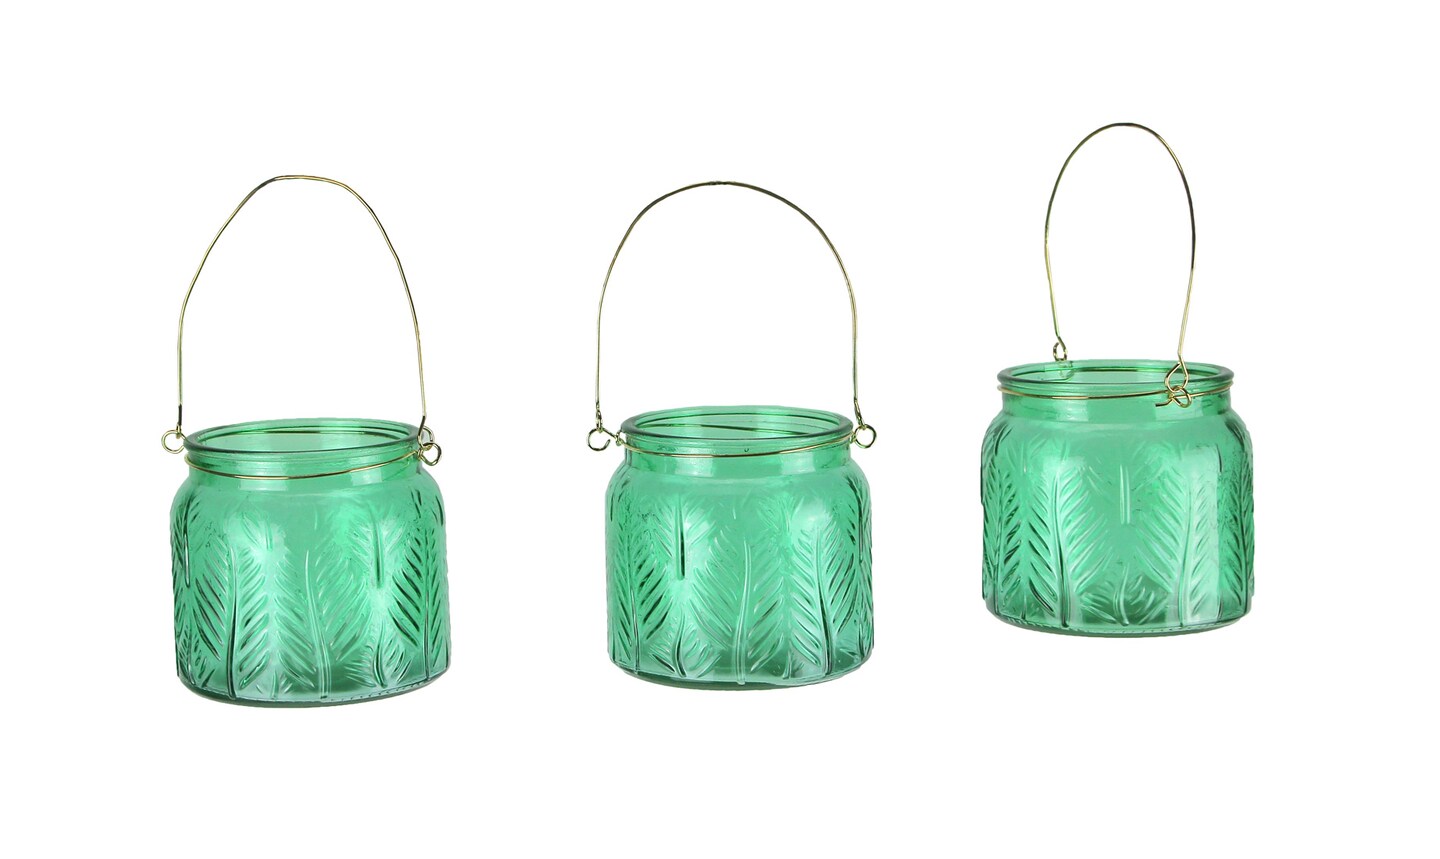 Set of 3 Leaf Textured Green Glass Tealight Candle Lanterns with Wire Handles